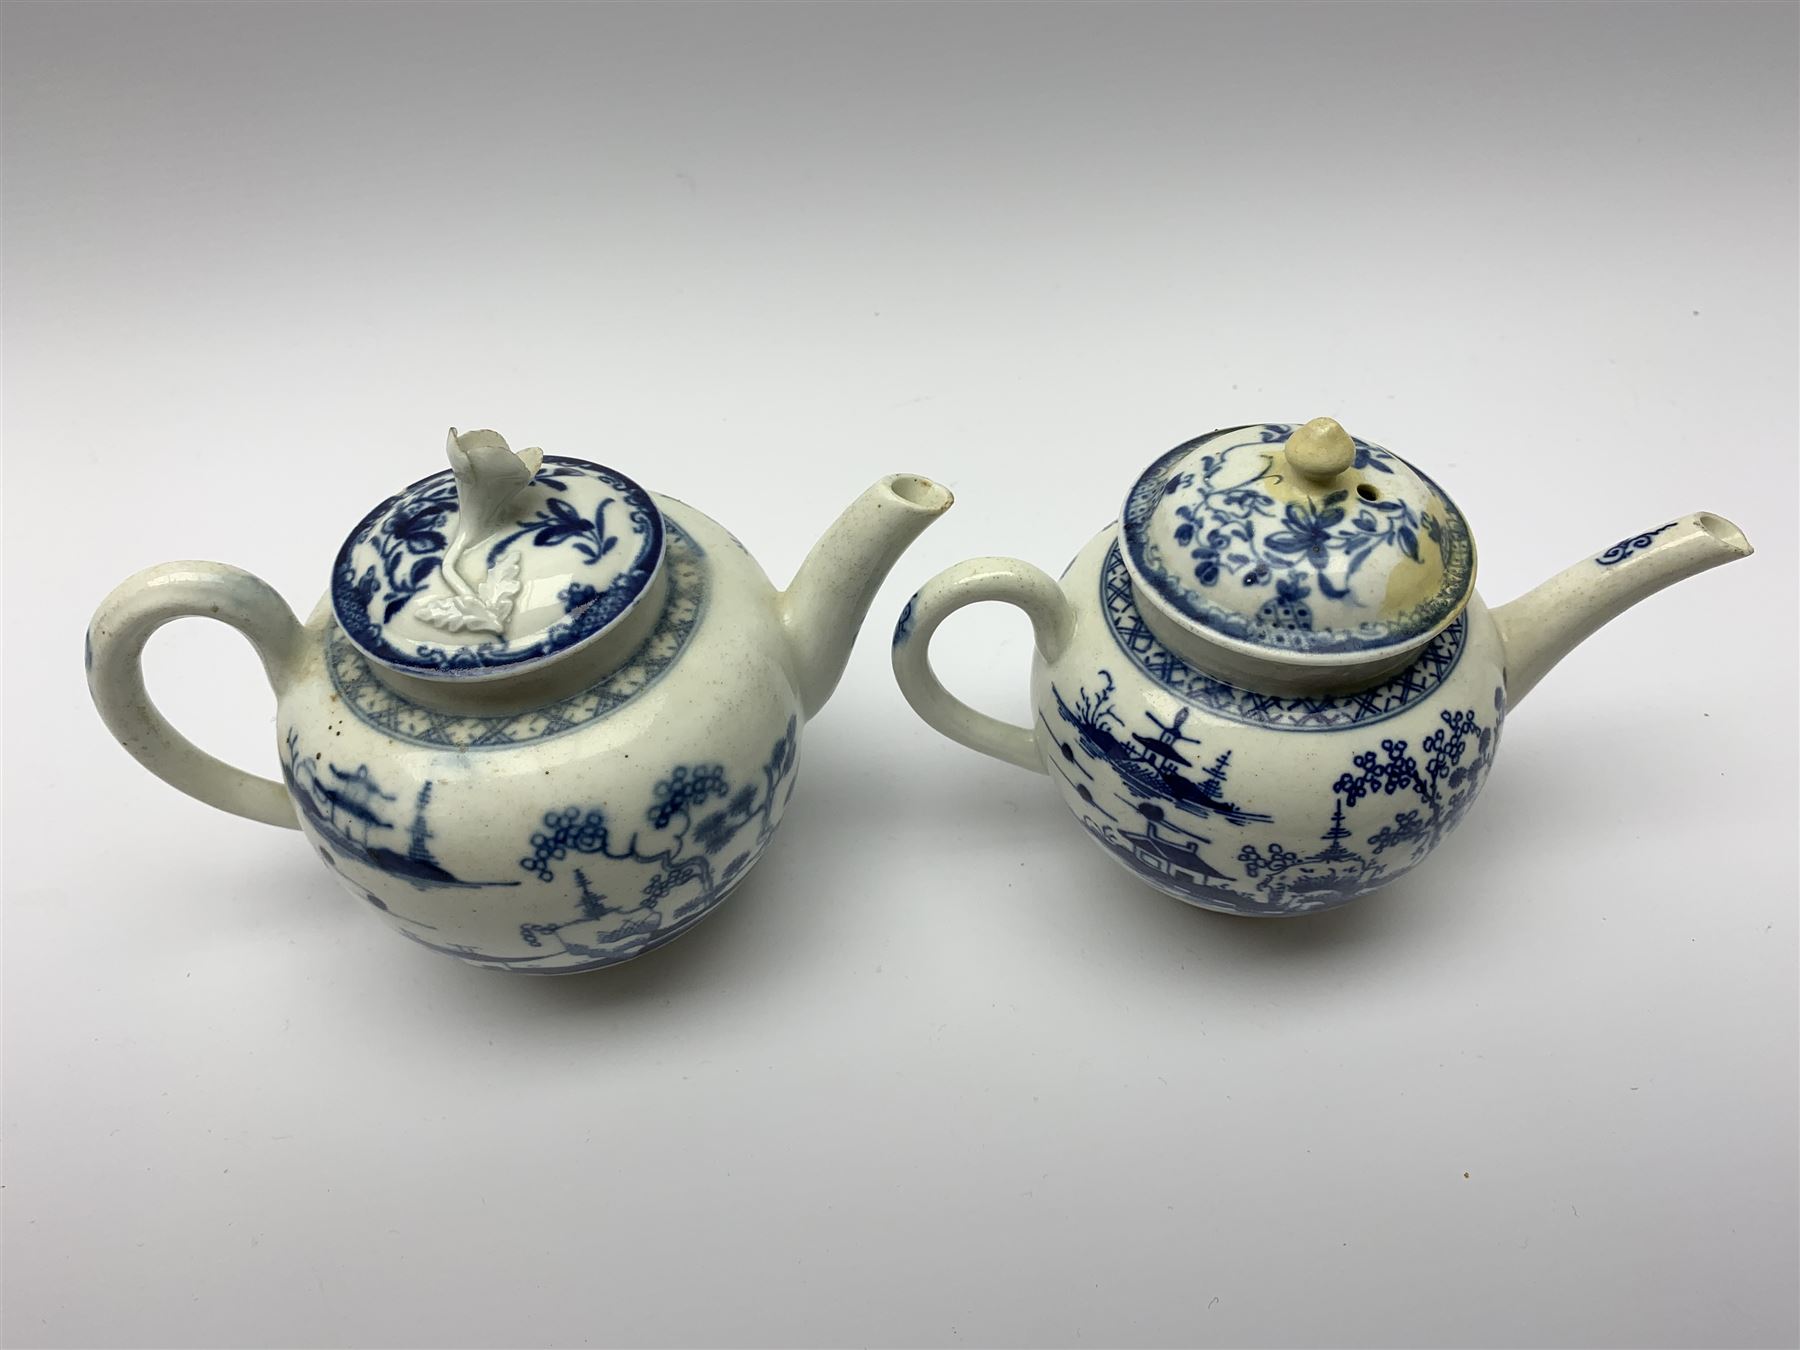 Two small 18th century Worcester teapots - Image 4 of 8